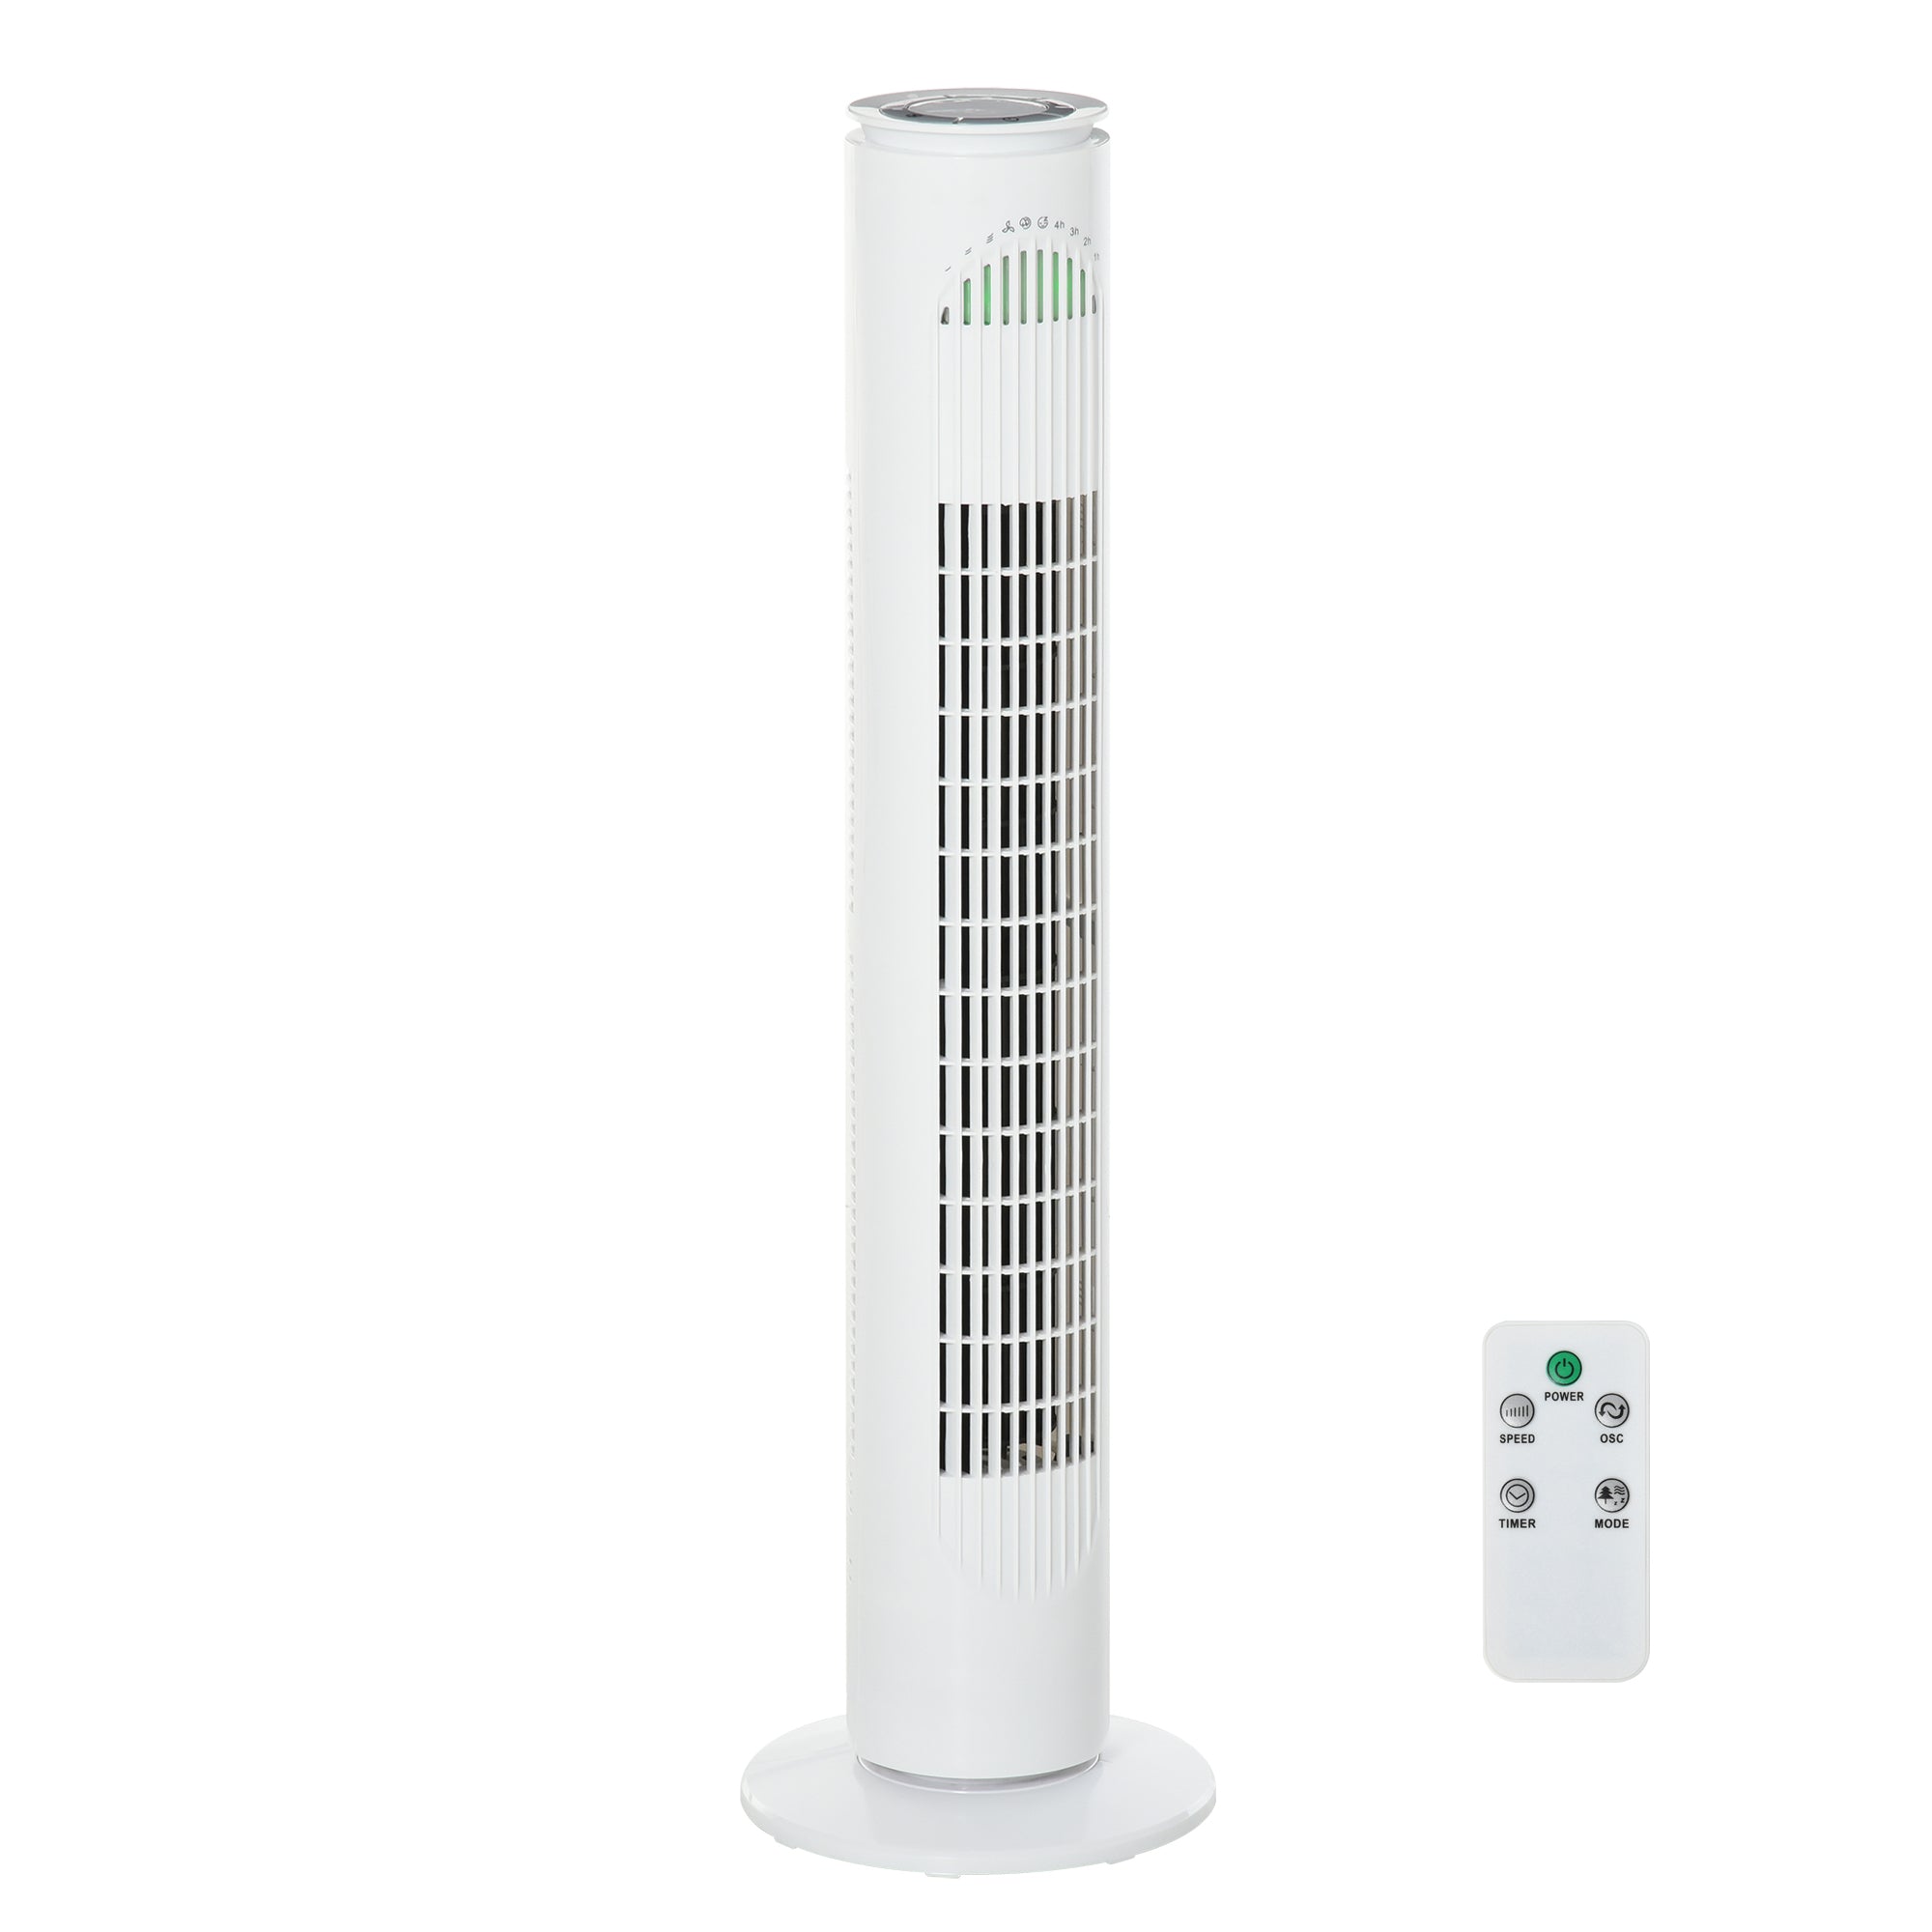 Nancy's Kaneohe Tower Fan - Standing Fan - 3 Positions and 3 Speeds - Remote Control - White